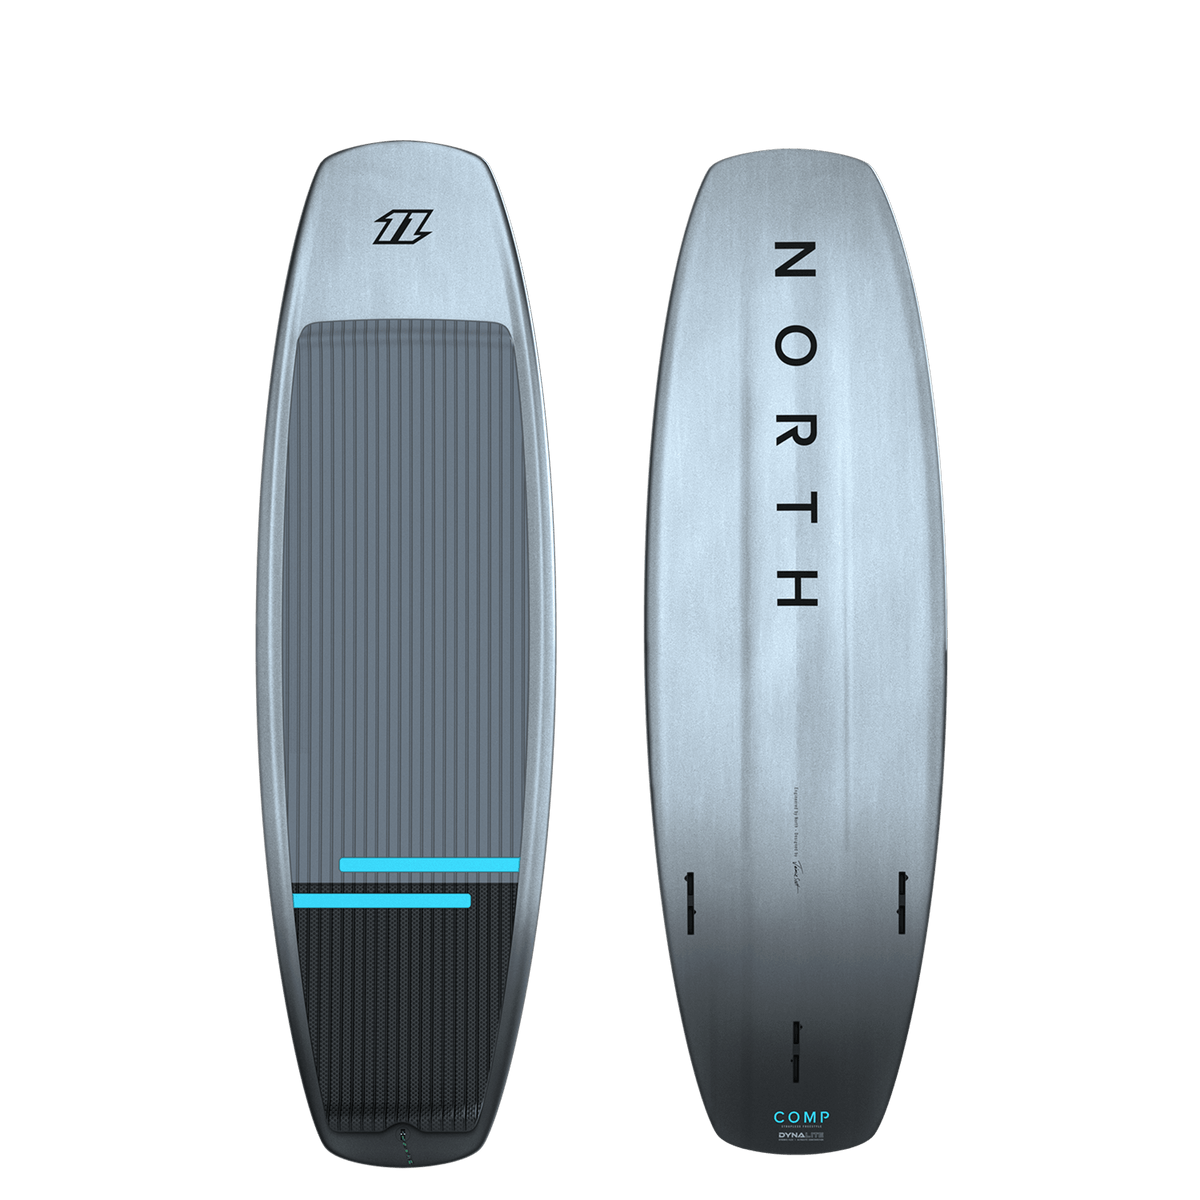 North Comp Dynalite Surfboard 2022